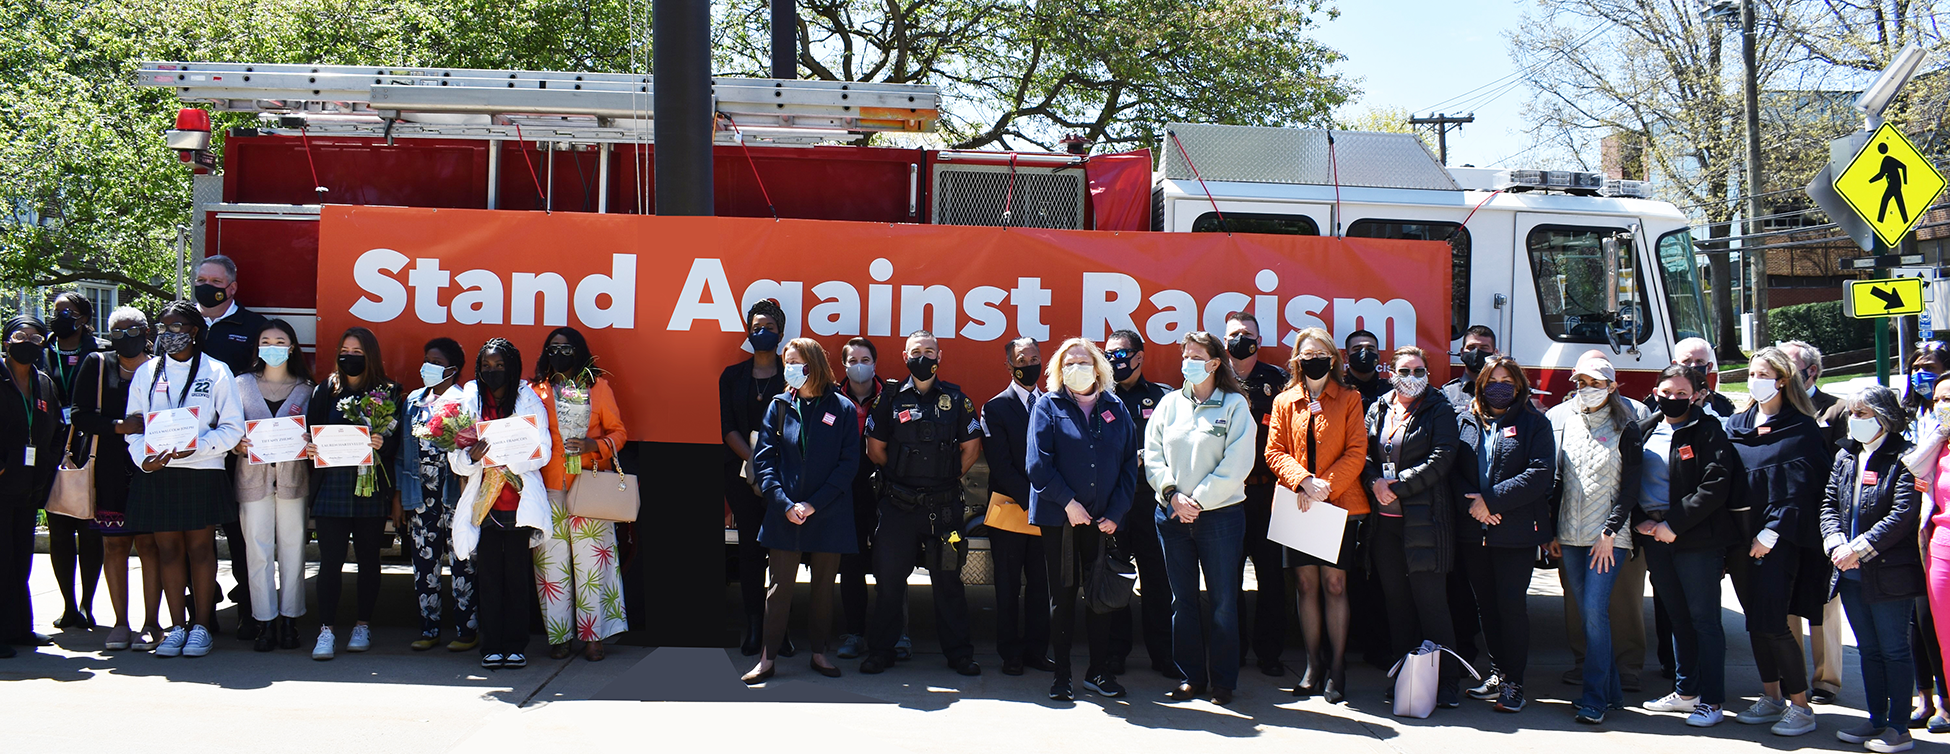 YWCA Stand Against Racism